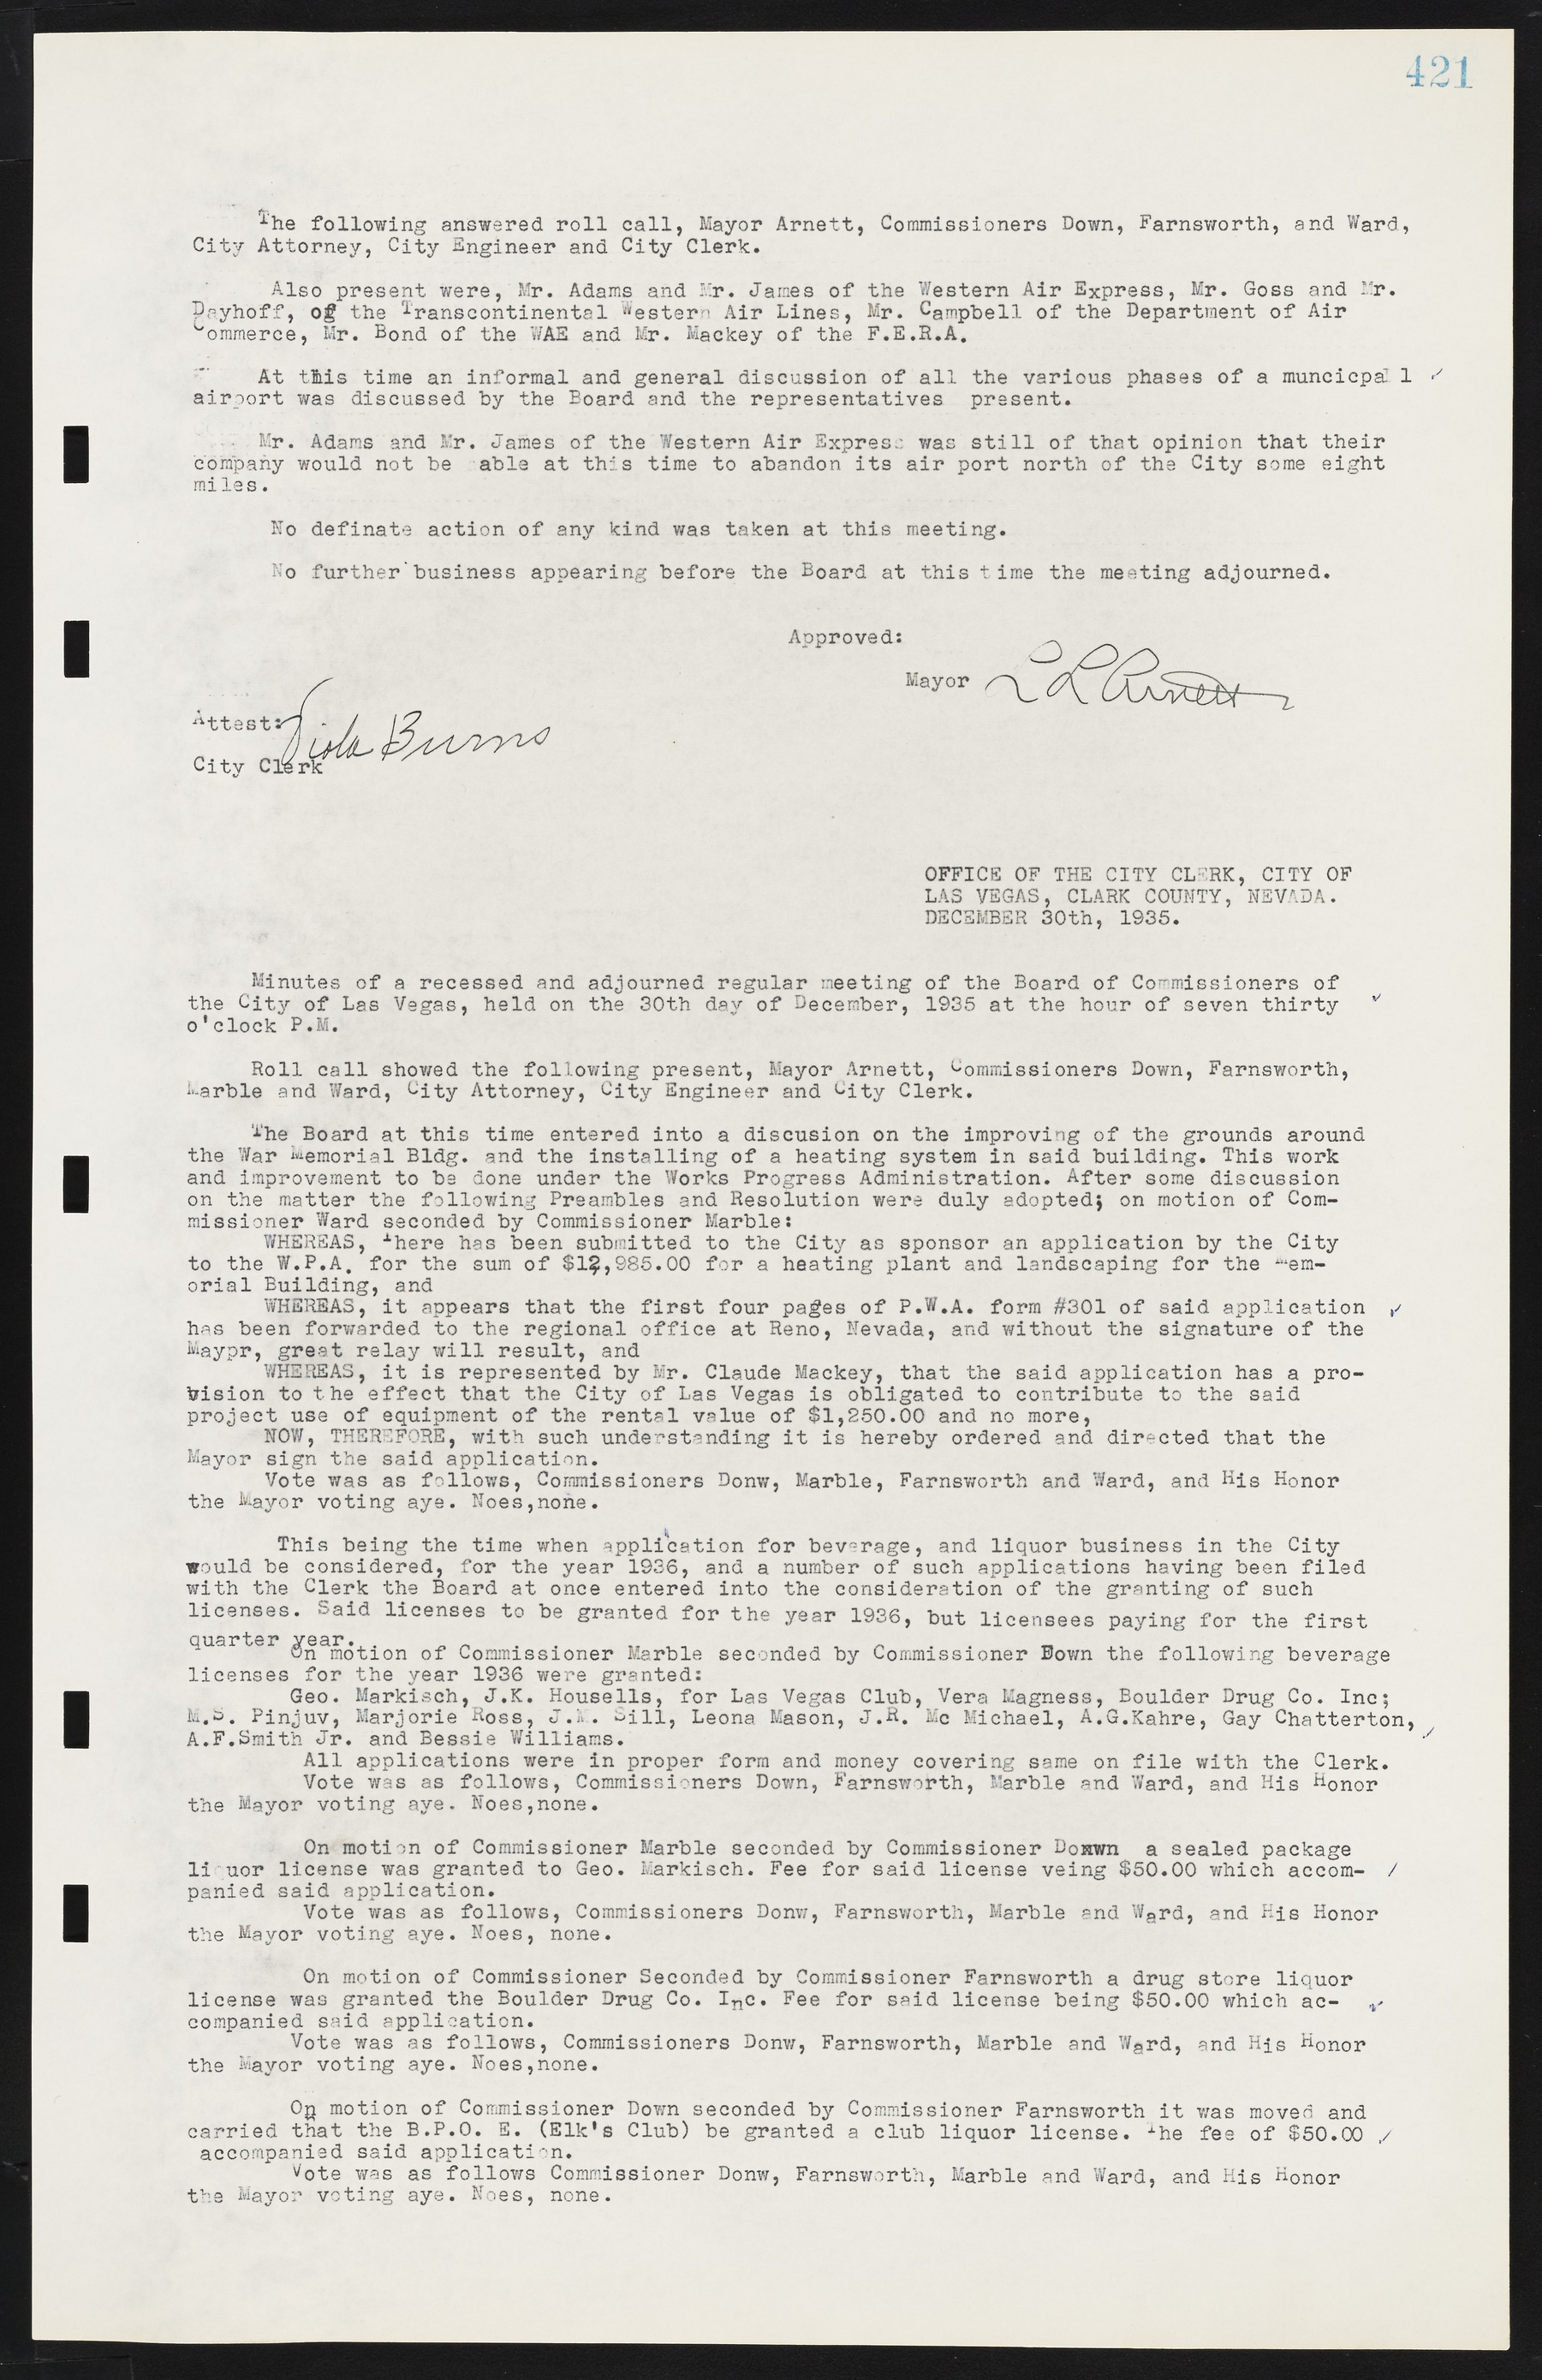 Las Vegas City Commission Minutes, May 14, 1929 to February 11, 1937, lvc000003-428